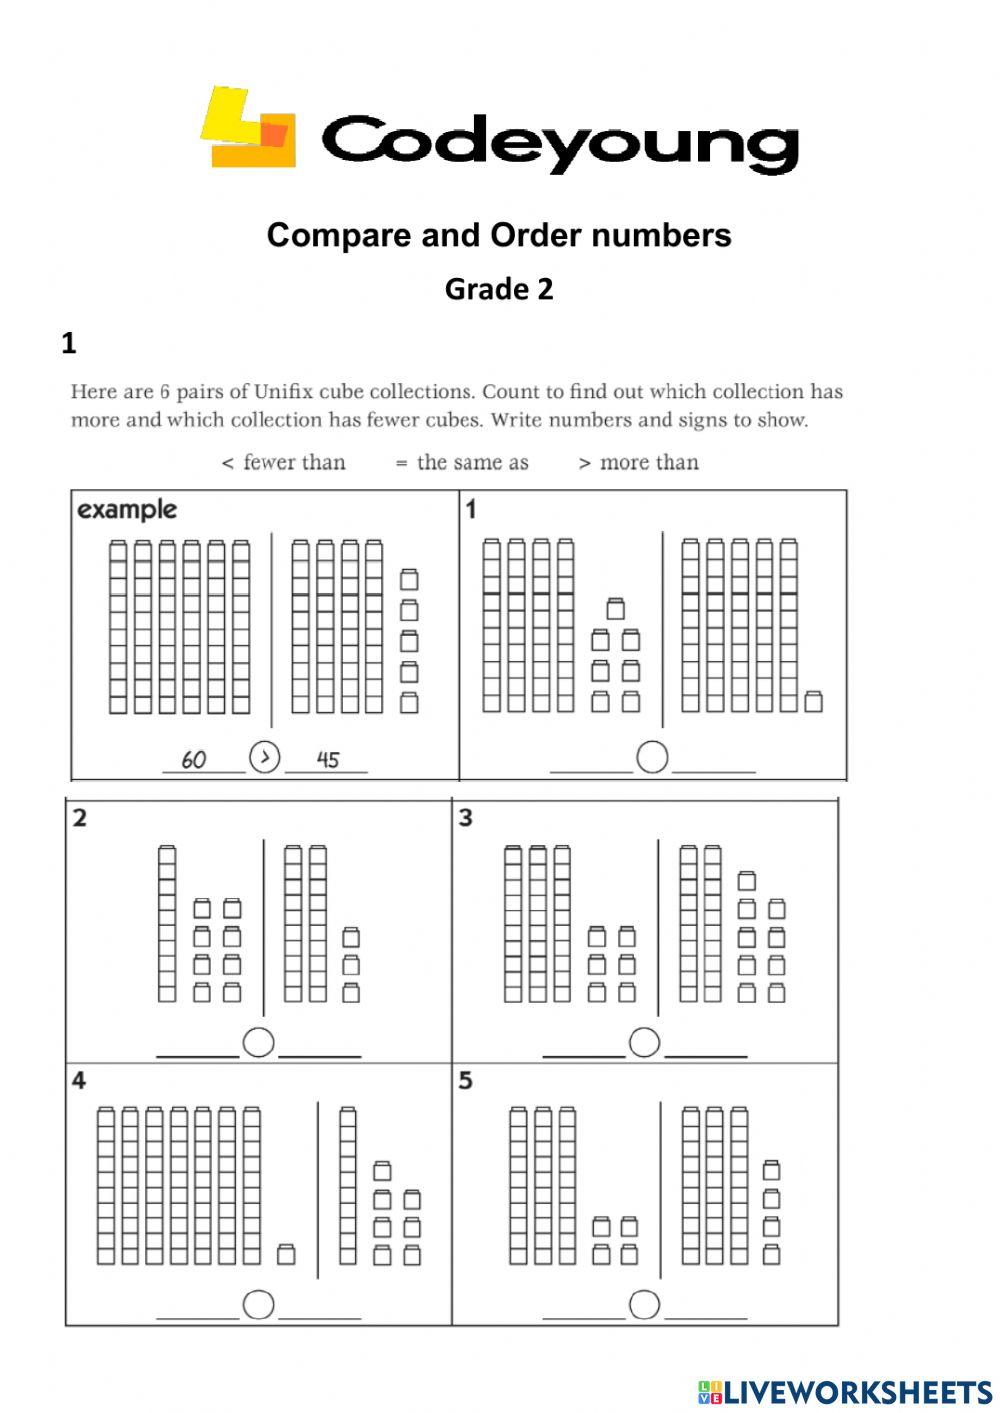 Compare and Order numbers WS 3